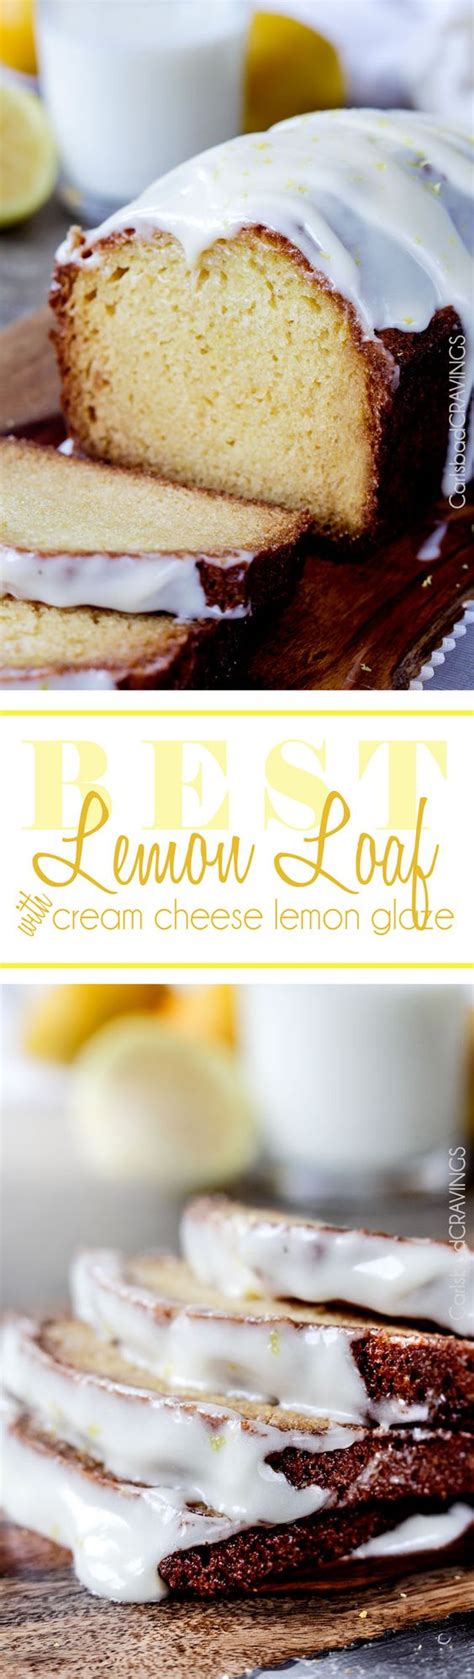 This Super Moist Lemon Loaf Aka Lemon Cake Bread Is To Live For Packed With Three Types Of